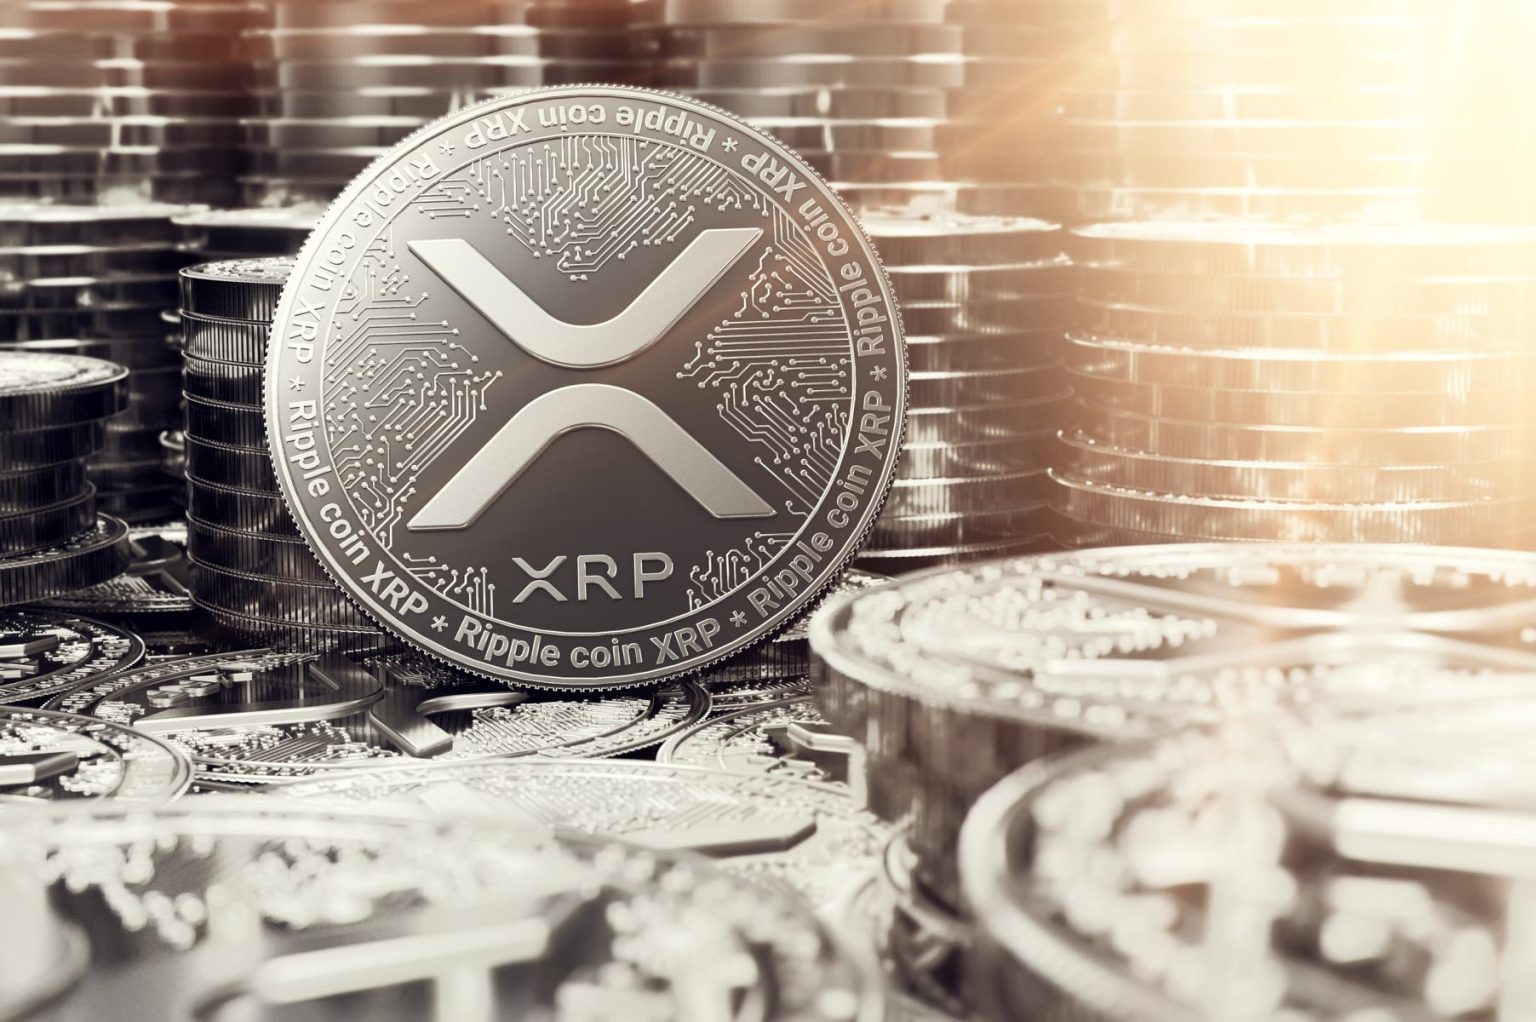 Ripple-XRP-silver-coins-stacked-on-top-of-each-other